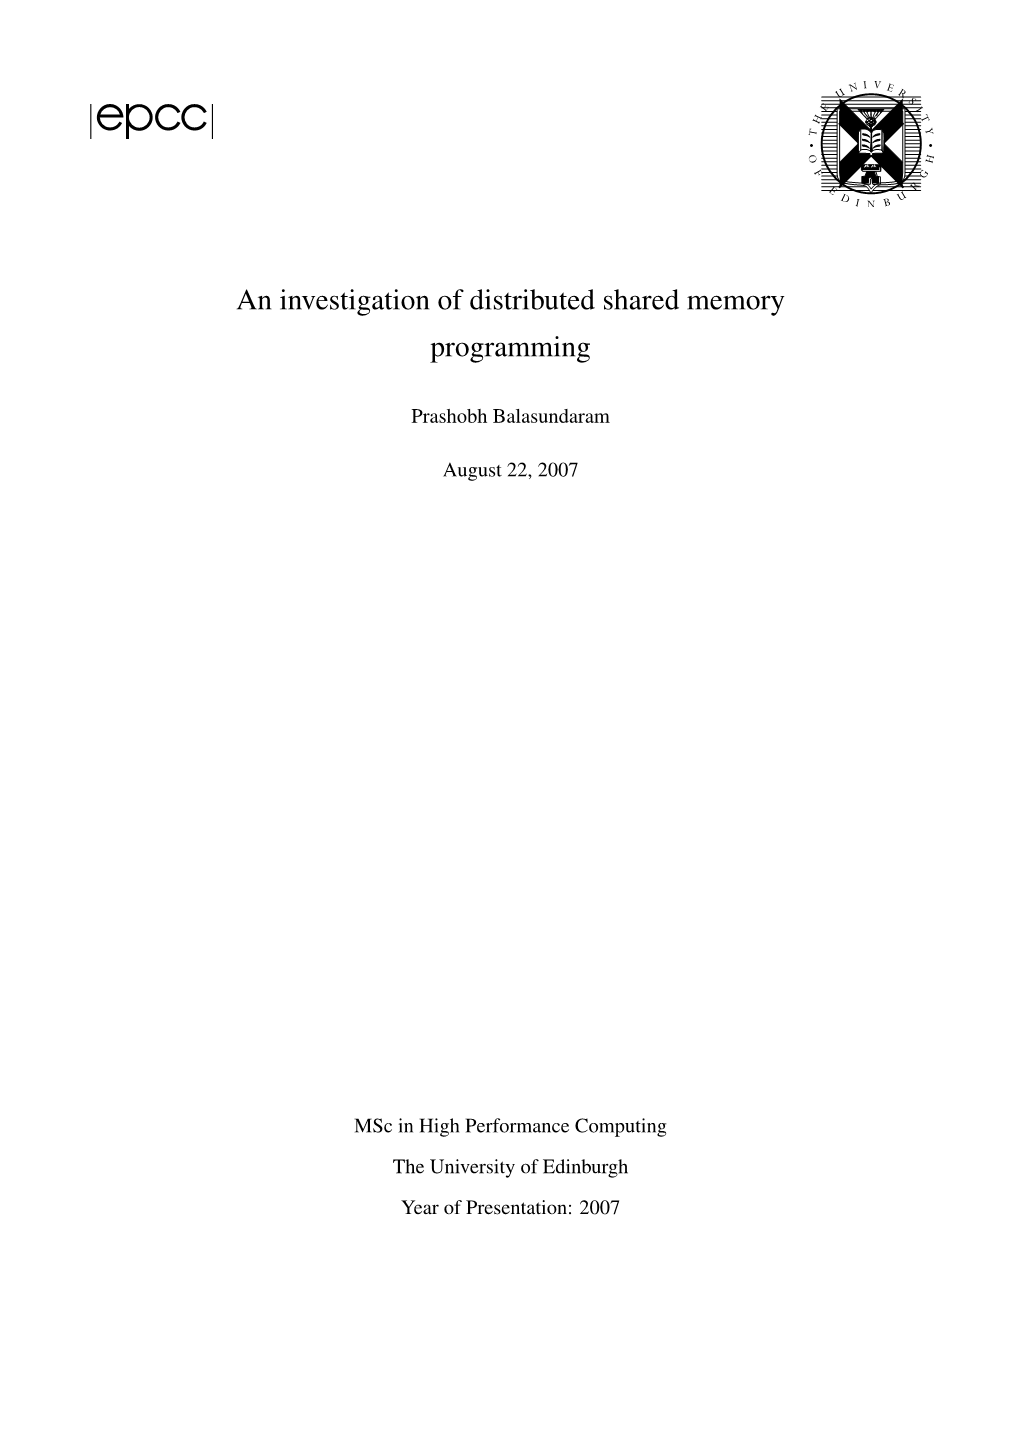 An Investigation of Distributed Shared Memory Programming